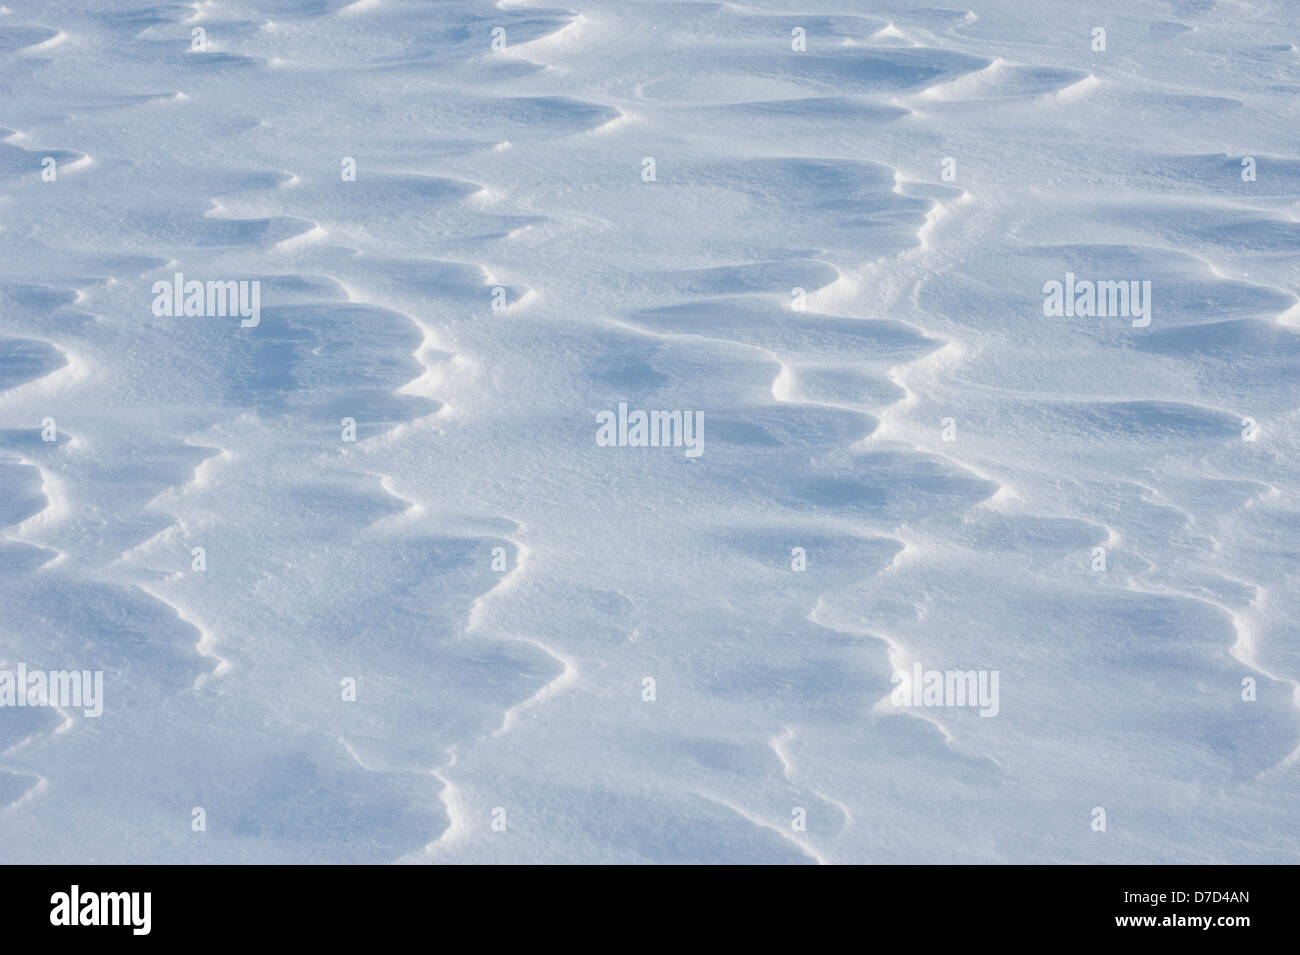 Patterns on wind-driven snow catch the sunlight on a cold winter's day. Stock Photo